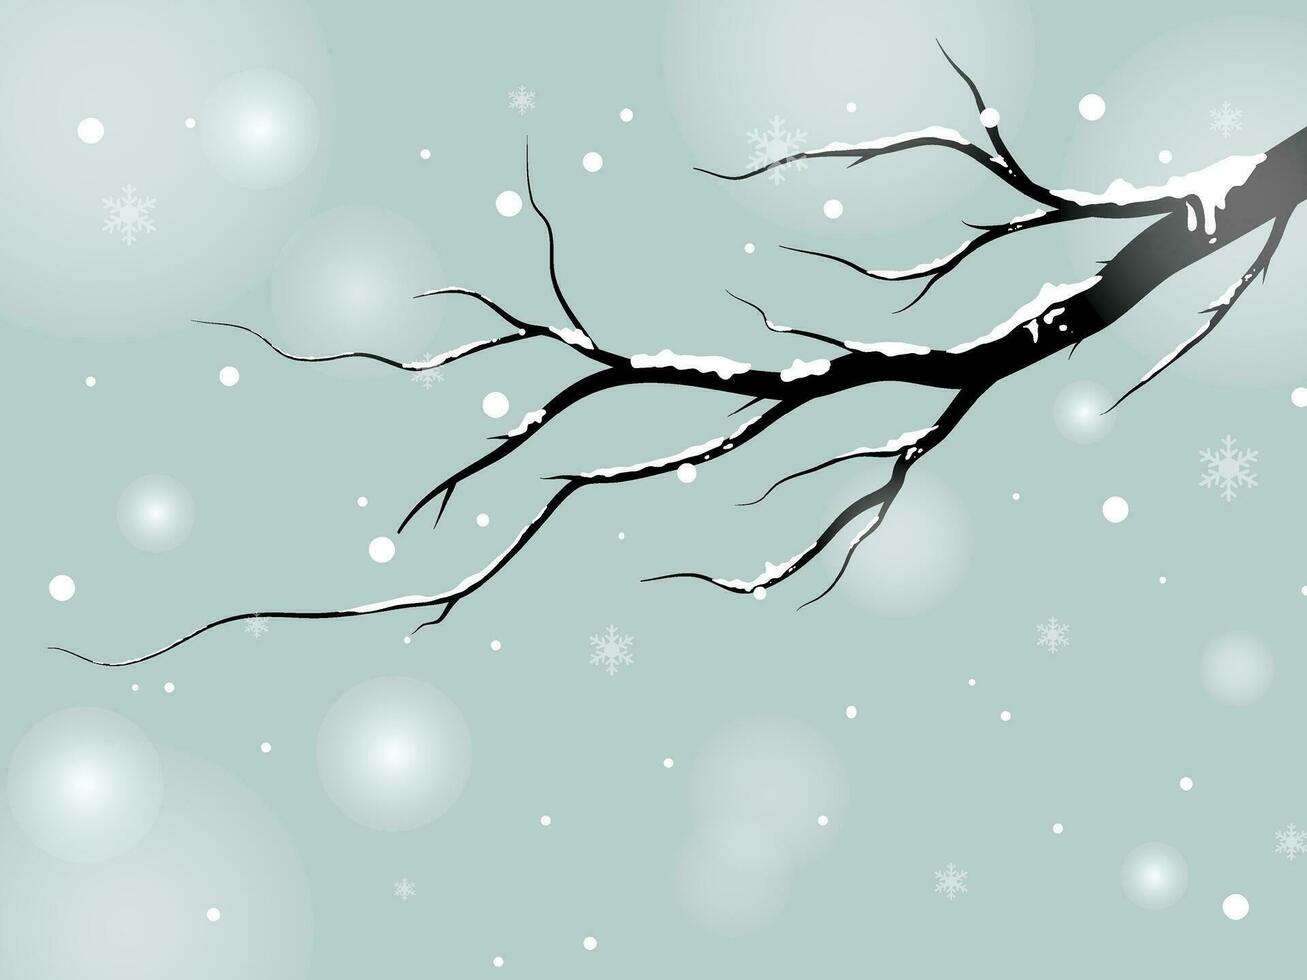 Black Branch tree forest background and snowing for winter season concept and welcome to Christmas season. Hand drawn isolated illustrations. vector